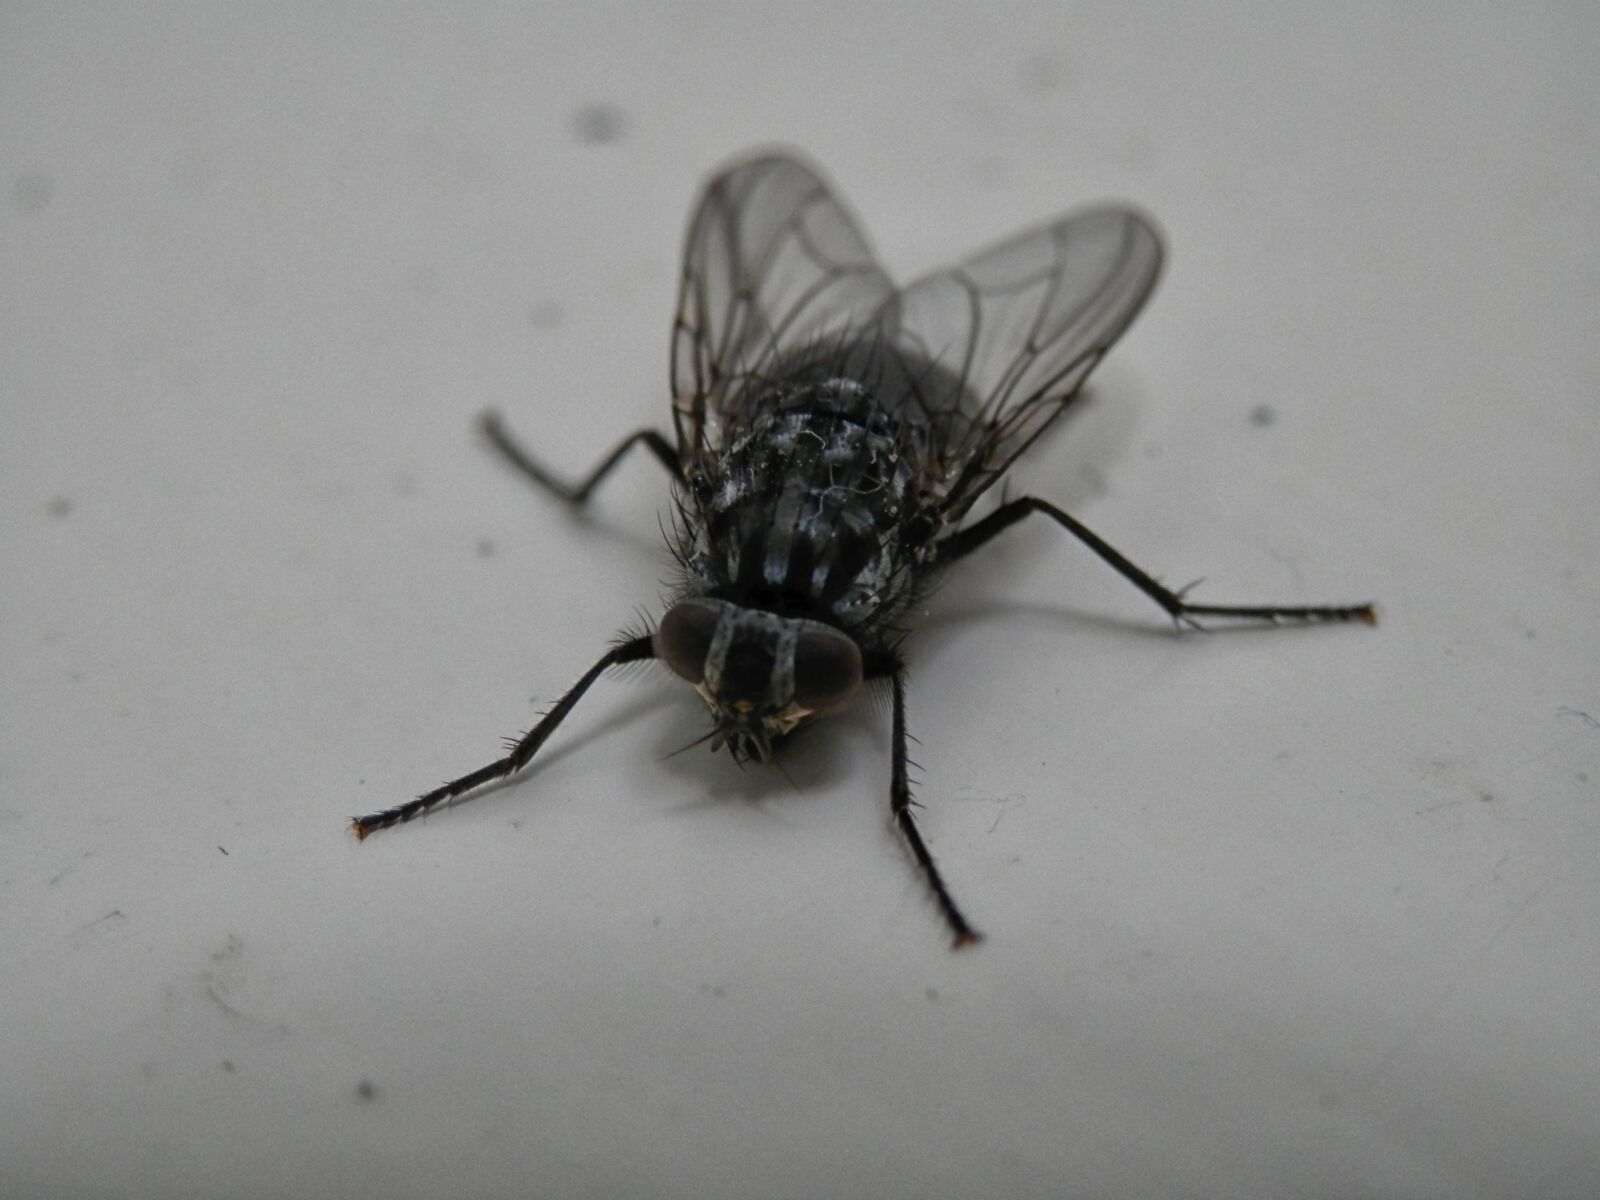 Olympus SZ-14 sample photo. Bluebottle, fly, insect photography